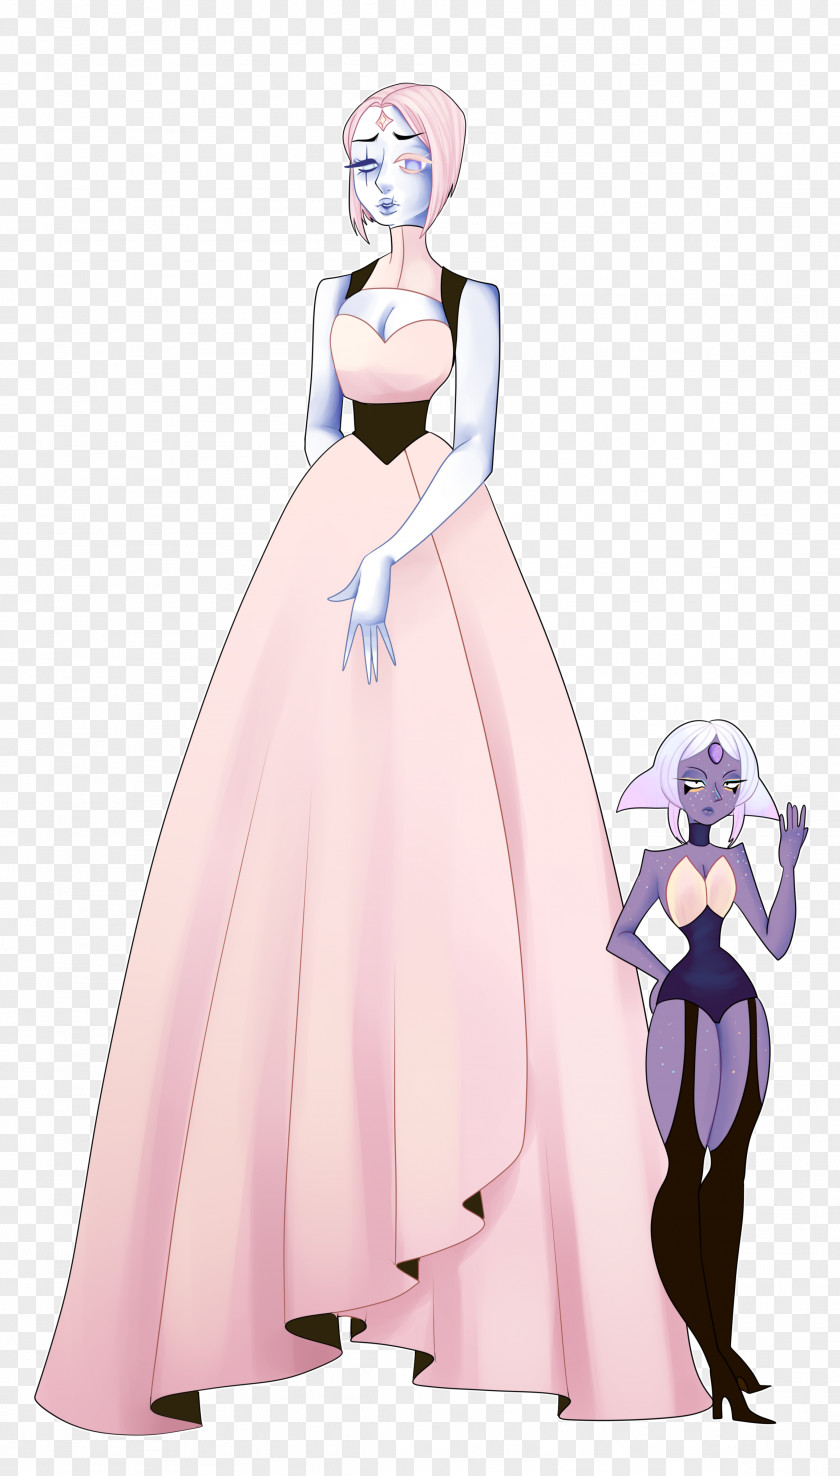 Synthetic Diamond Costume Design Gown Character Cartoon PNG